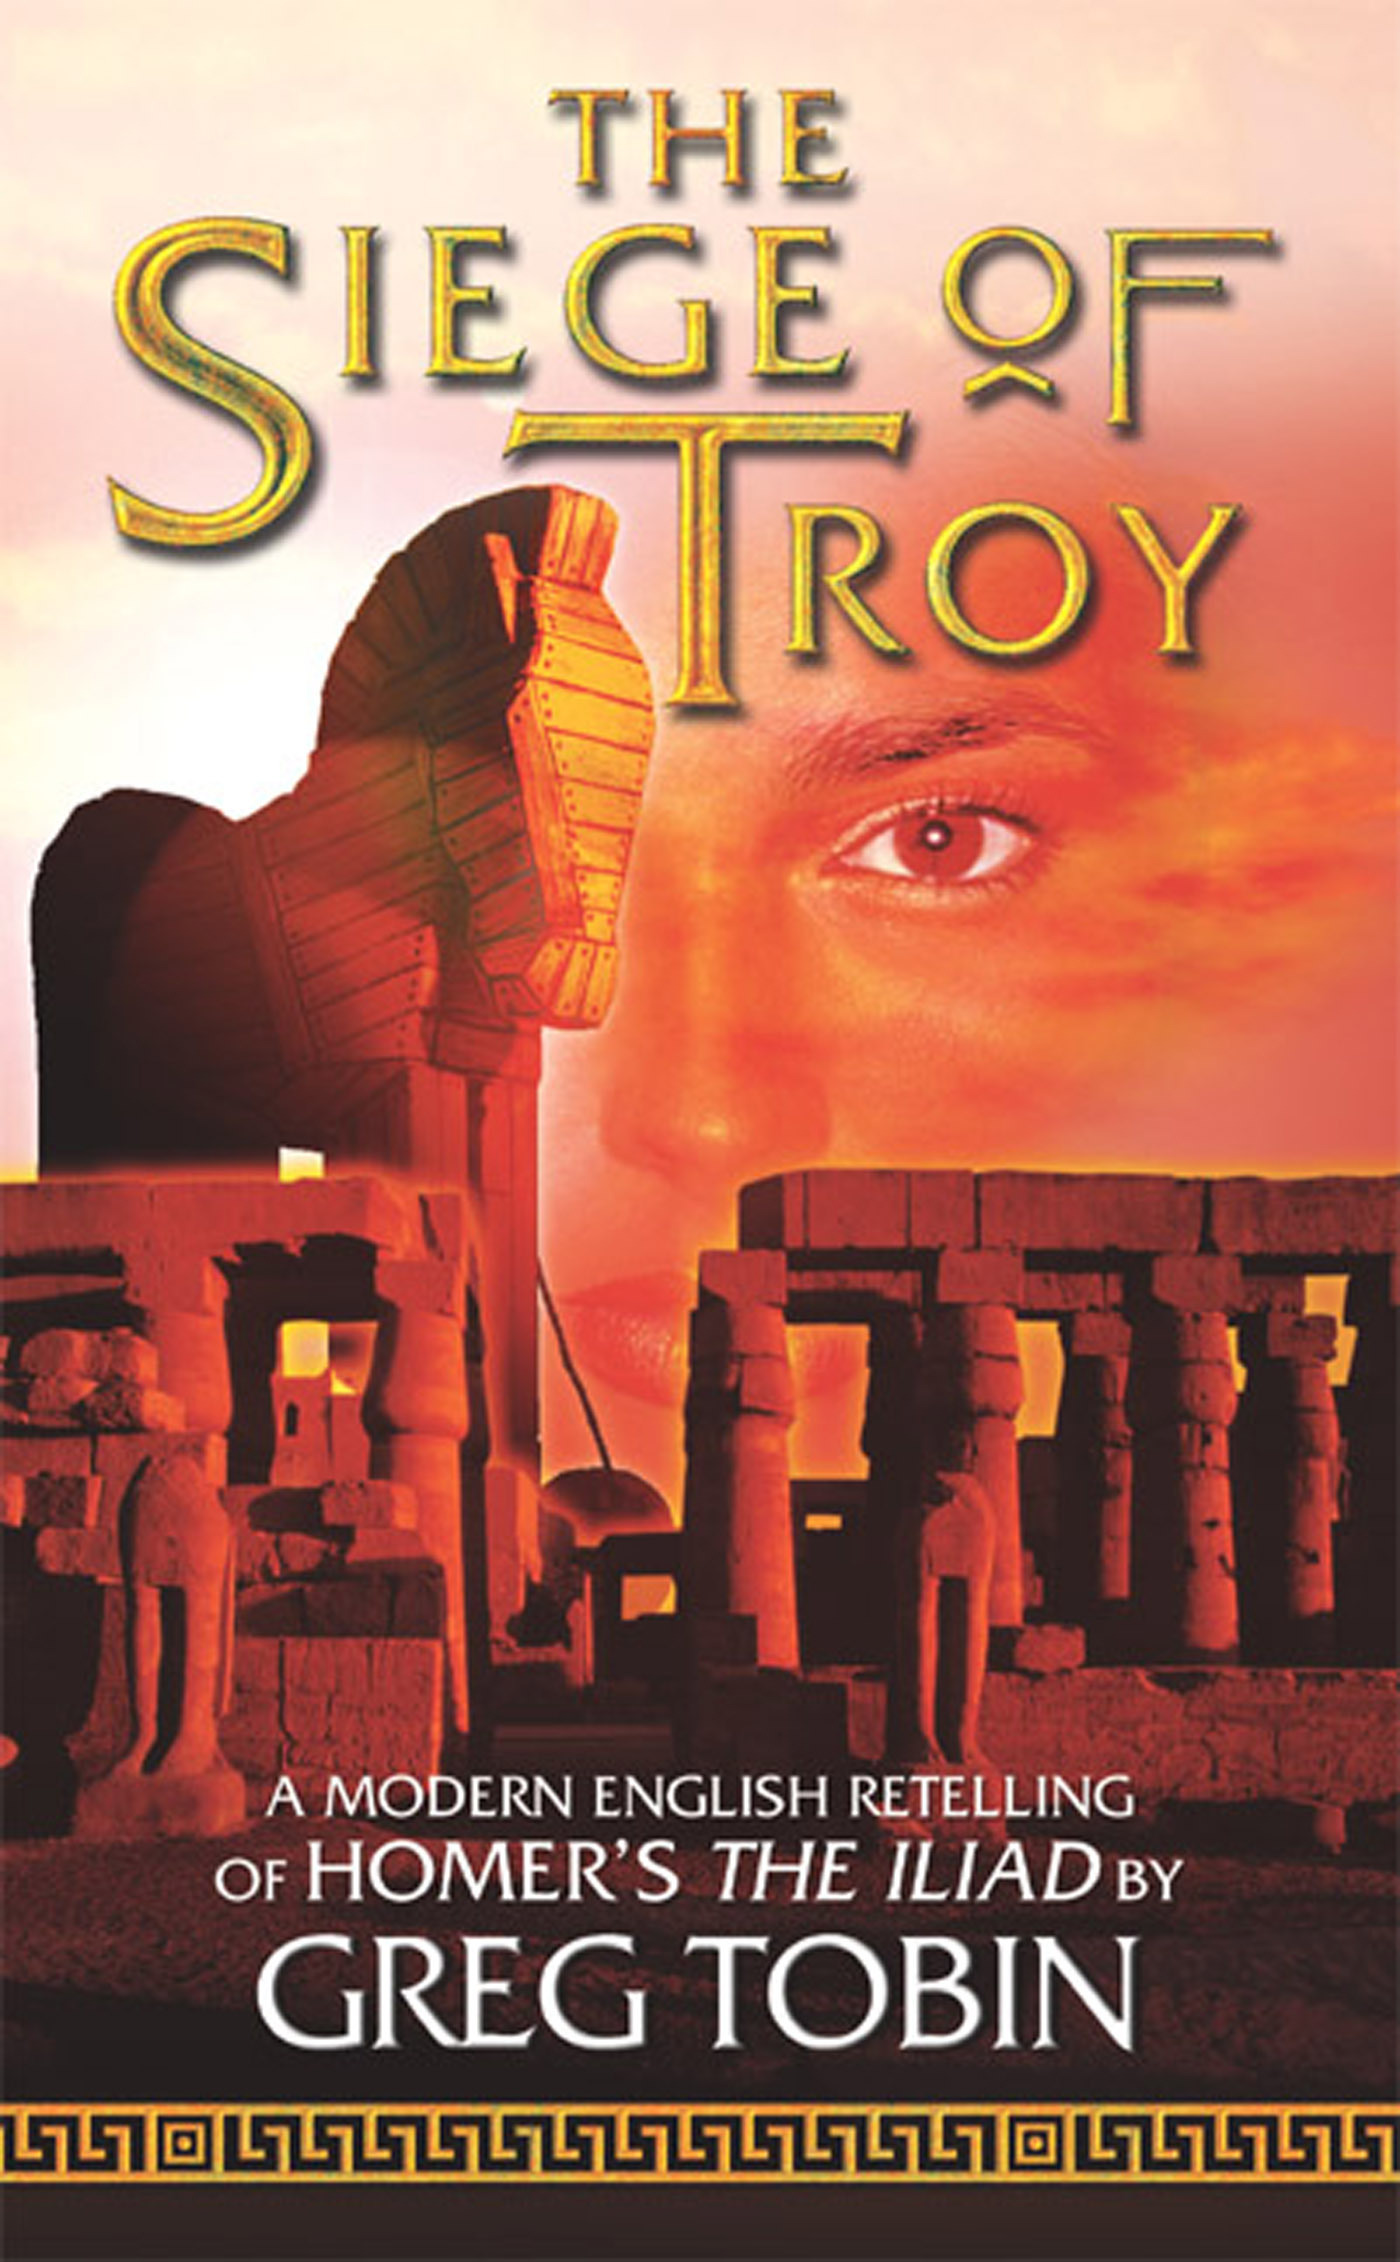 The Siege of Troy : A Modern English Retelling of Homer’s The Iliad by Greg Tobin